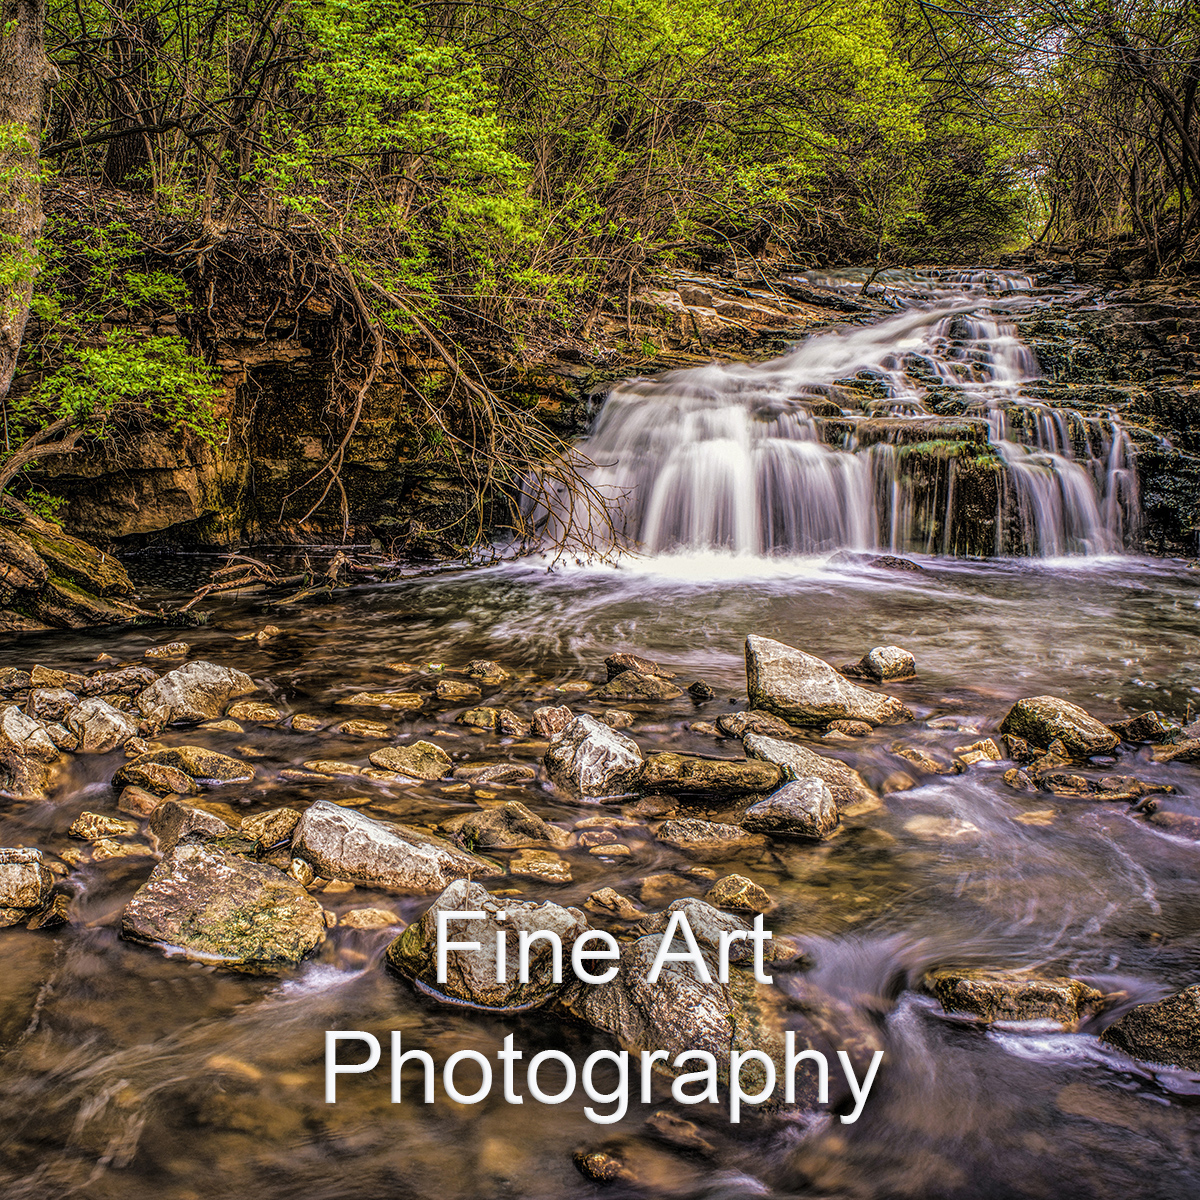 Fine art photography by Dan Cleary of Cleary Creative Photography in Dayton Ohio